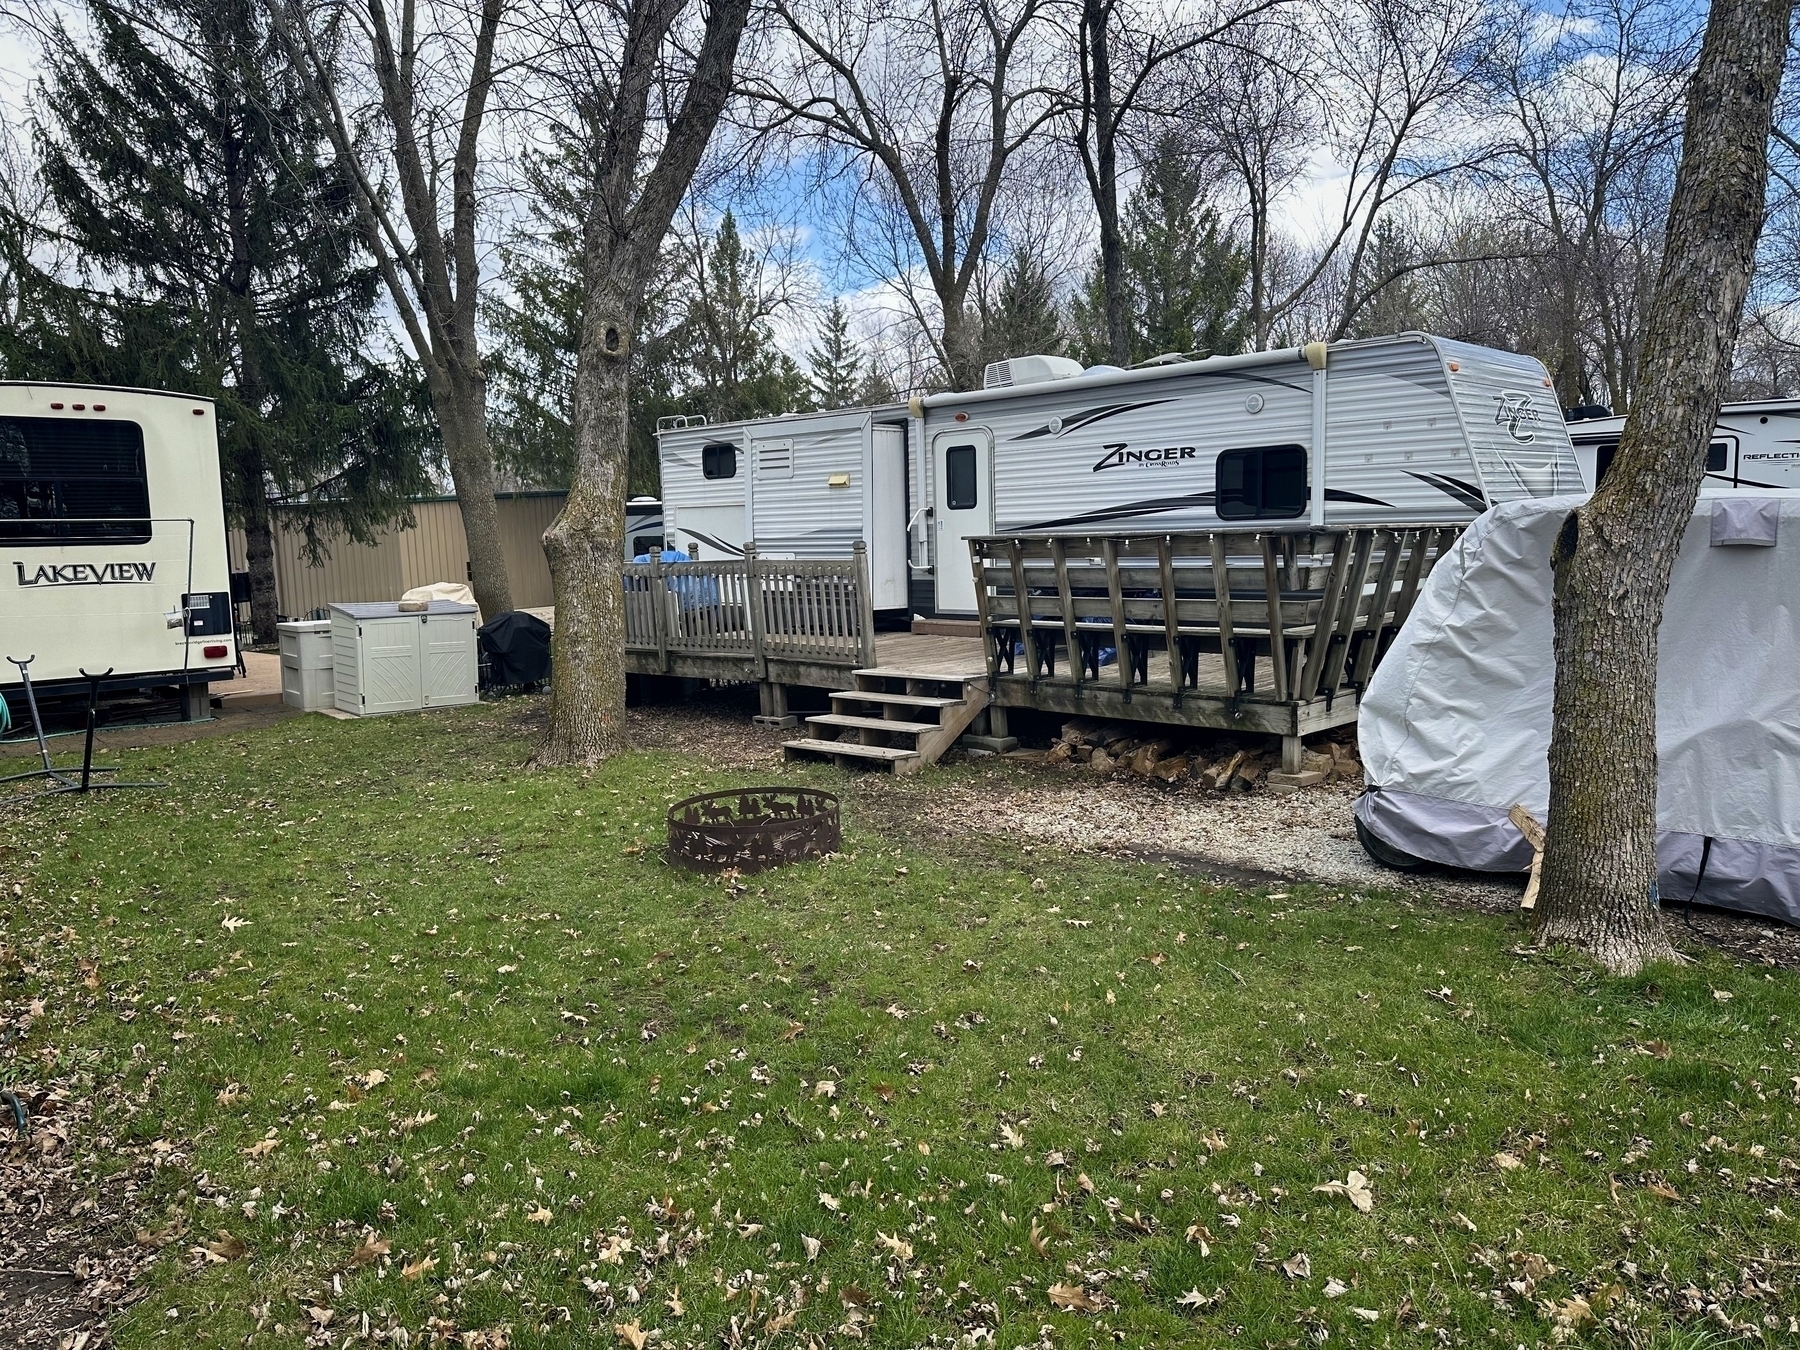 A stationary trailer with an attached wooden deck is set among leaf-scattered grass, flanked by trees and another trailer, indicating a campsite or RV park.